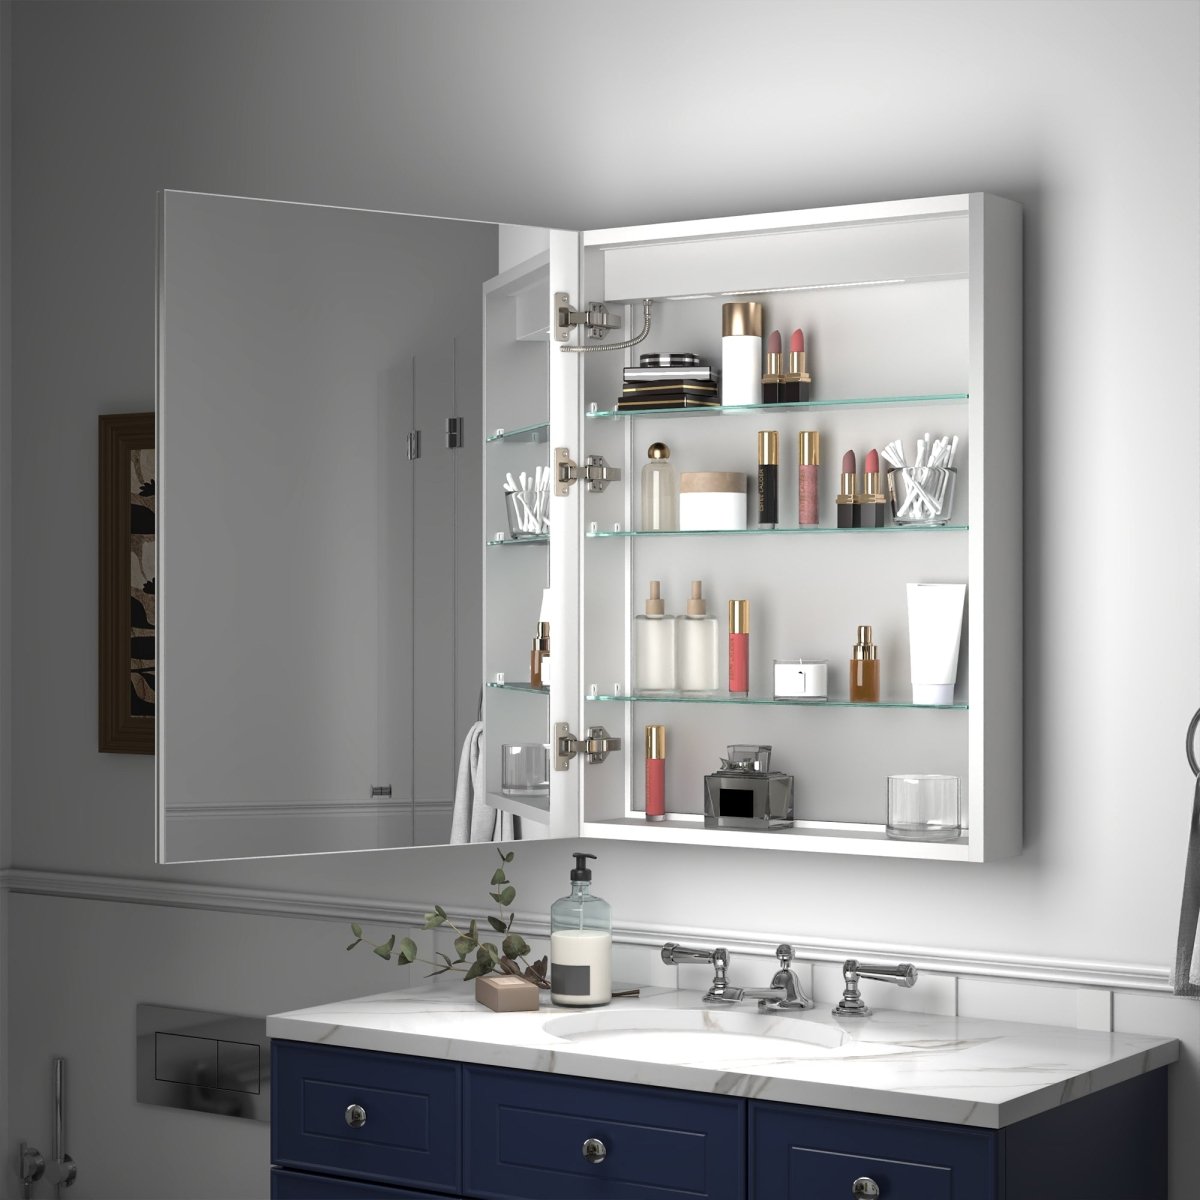 Rim 24" W x 32" H Led Lighted Medicine Cabinet Recessed or Surface with mirrors,Hinge on the left